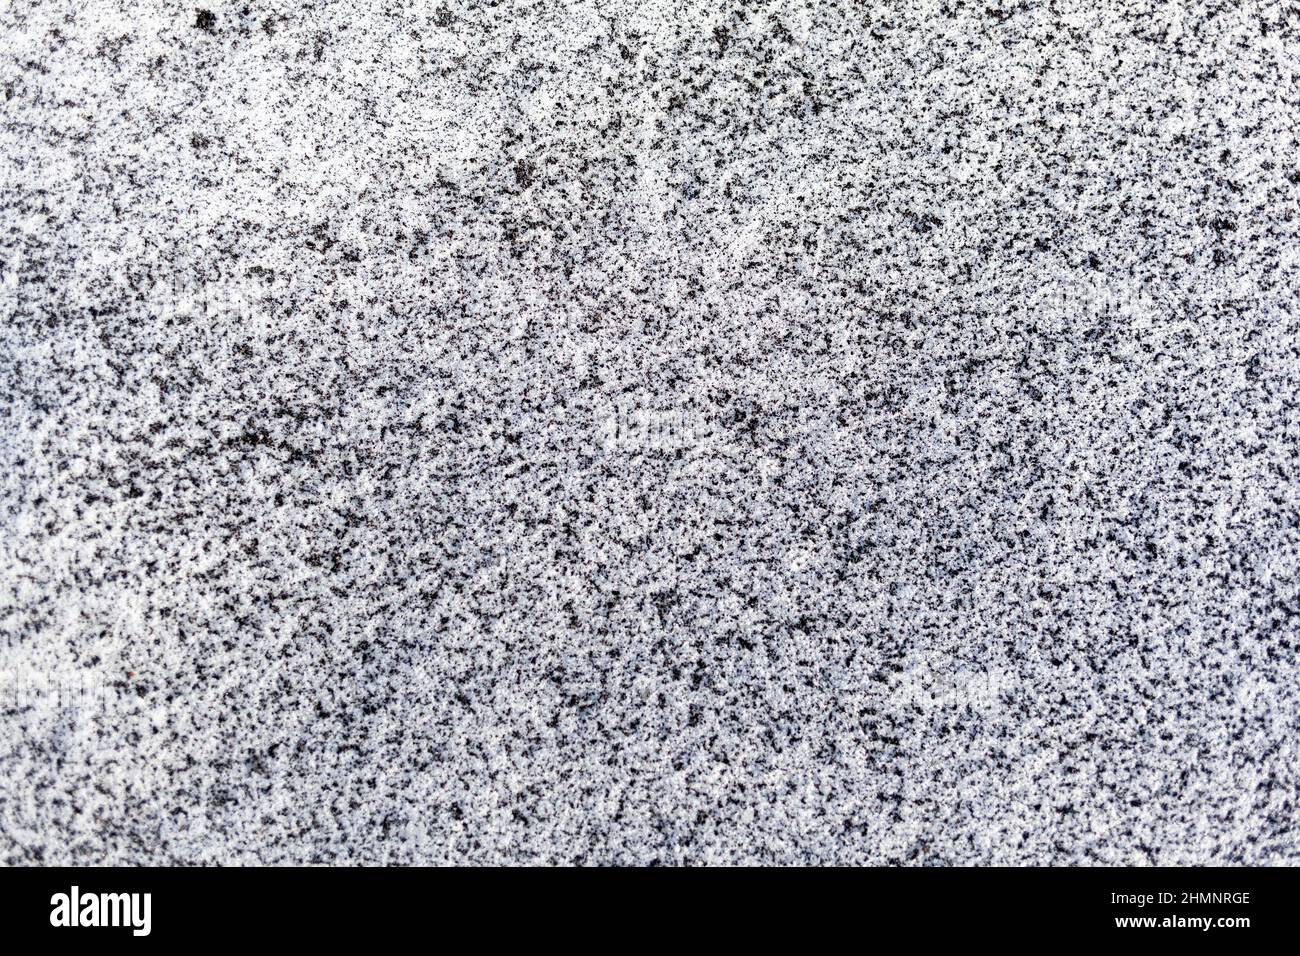 Black soot from the boiler room on white snow. Natural background. Snow mixed with coal soot, poor ecology. Environmental pollution Stock Photo